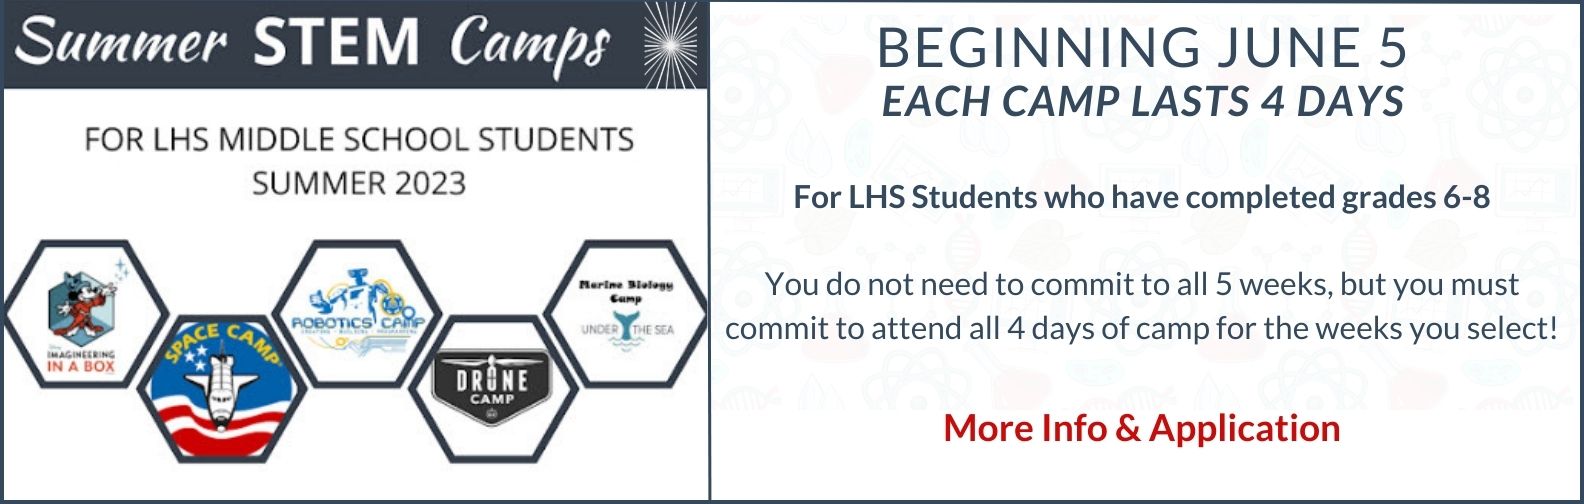 Summer Stem Camps For LHS Middle School Student Summer 2023 See